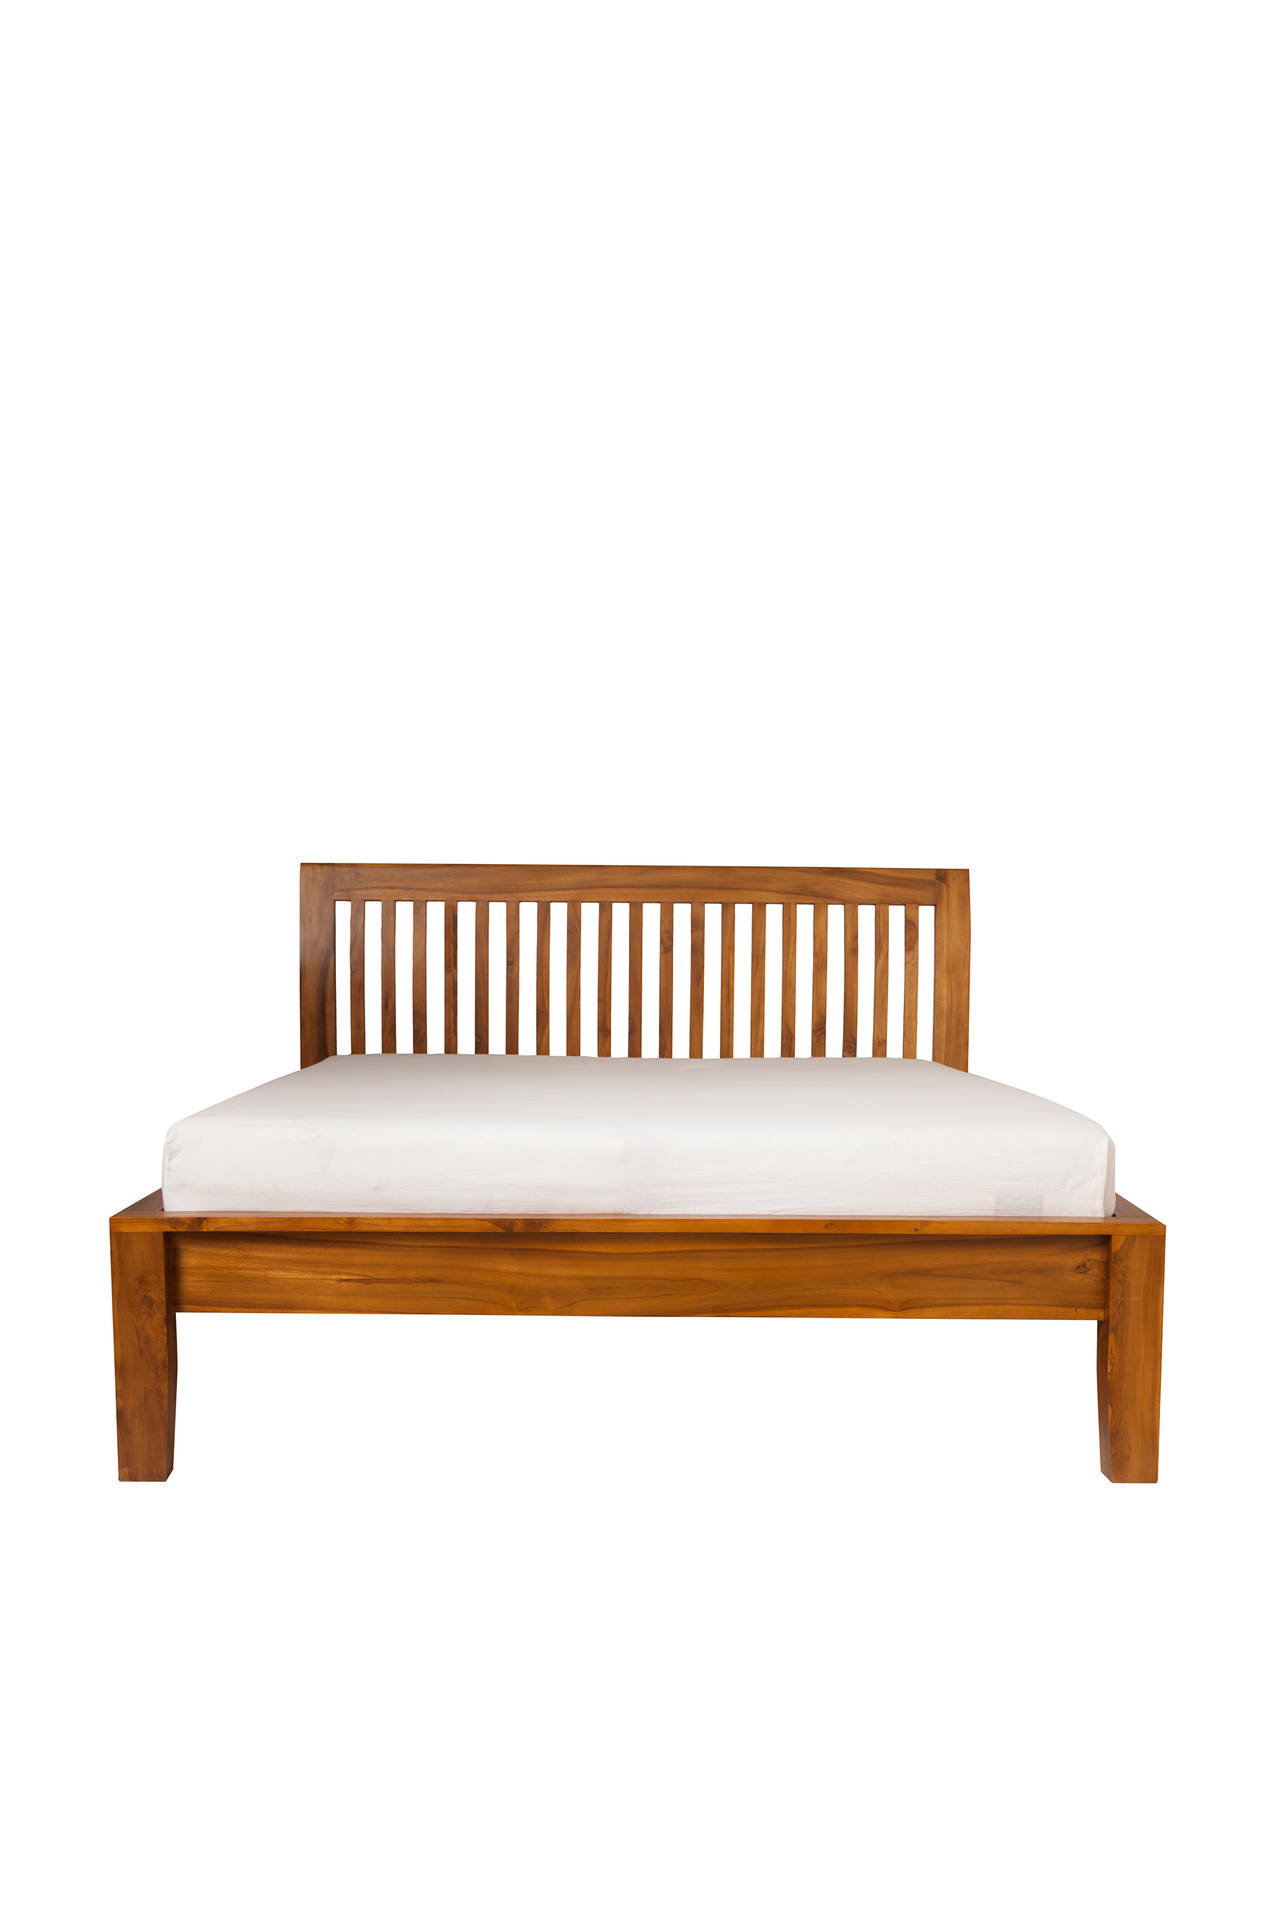 SLEIGH BED 160